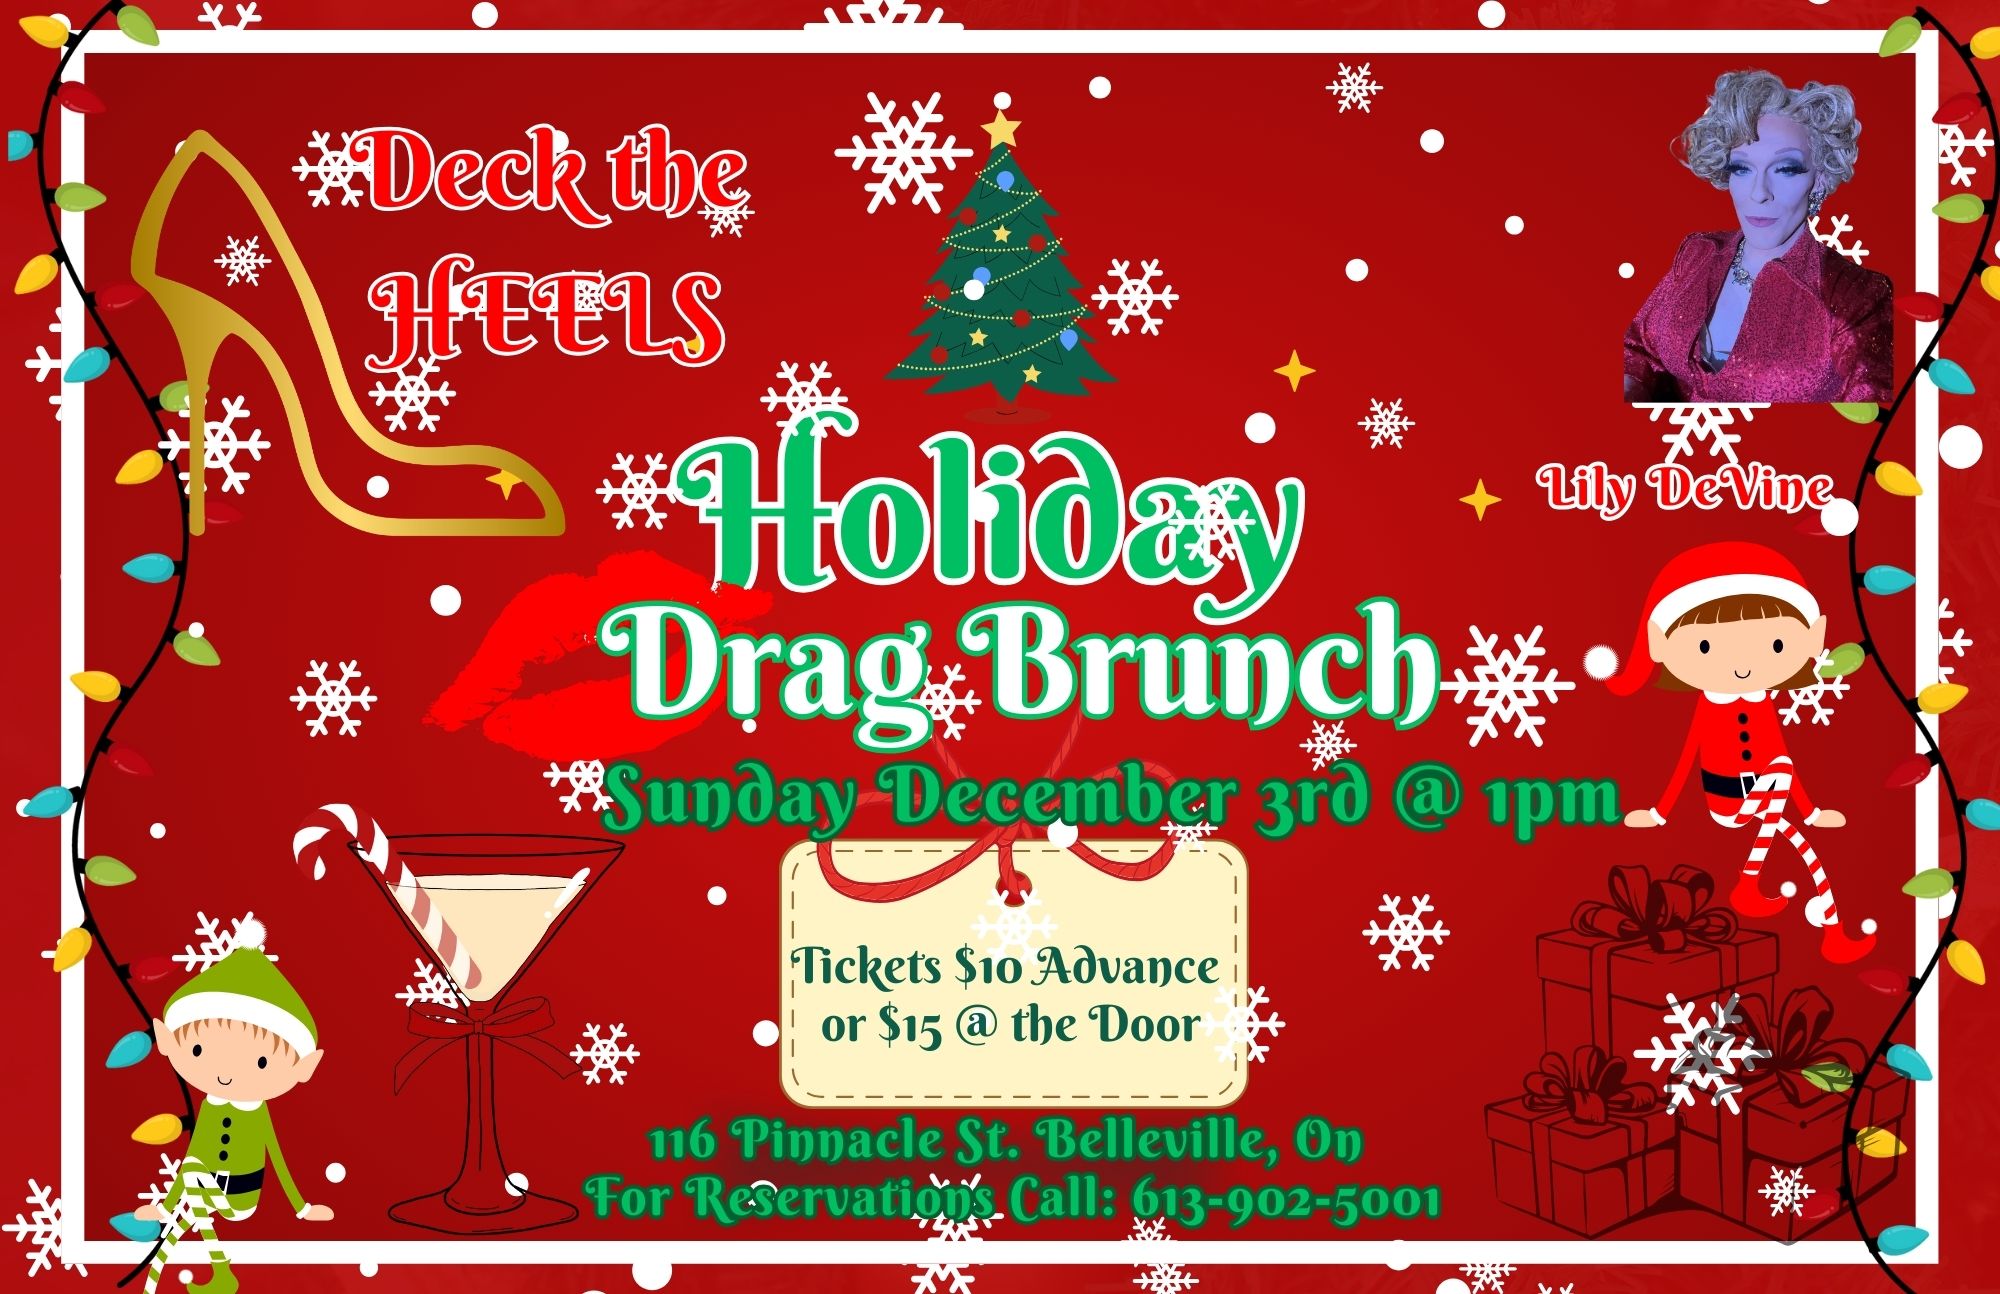 Holiday themed event poster with same details highlighted in our event description. Has image of performer, christmas tree and holiday gnome.